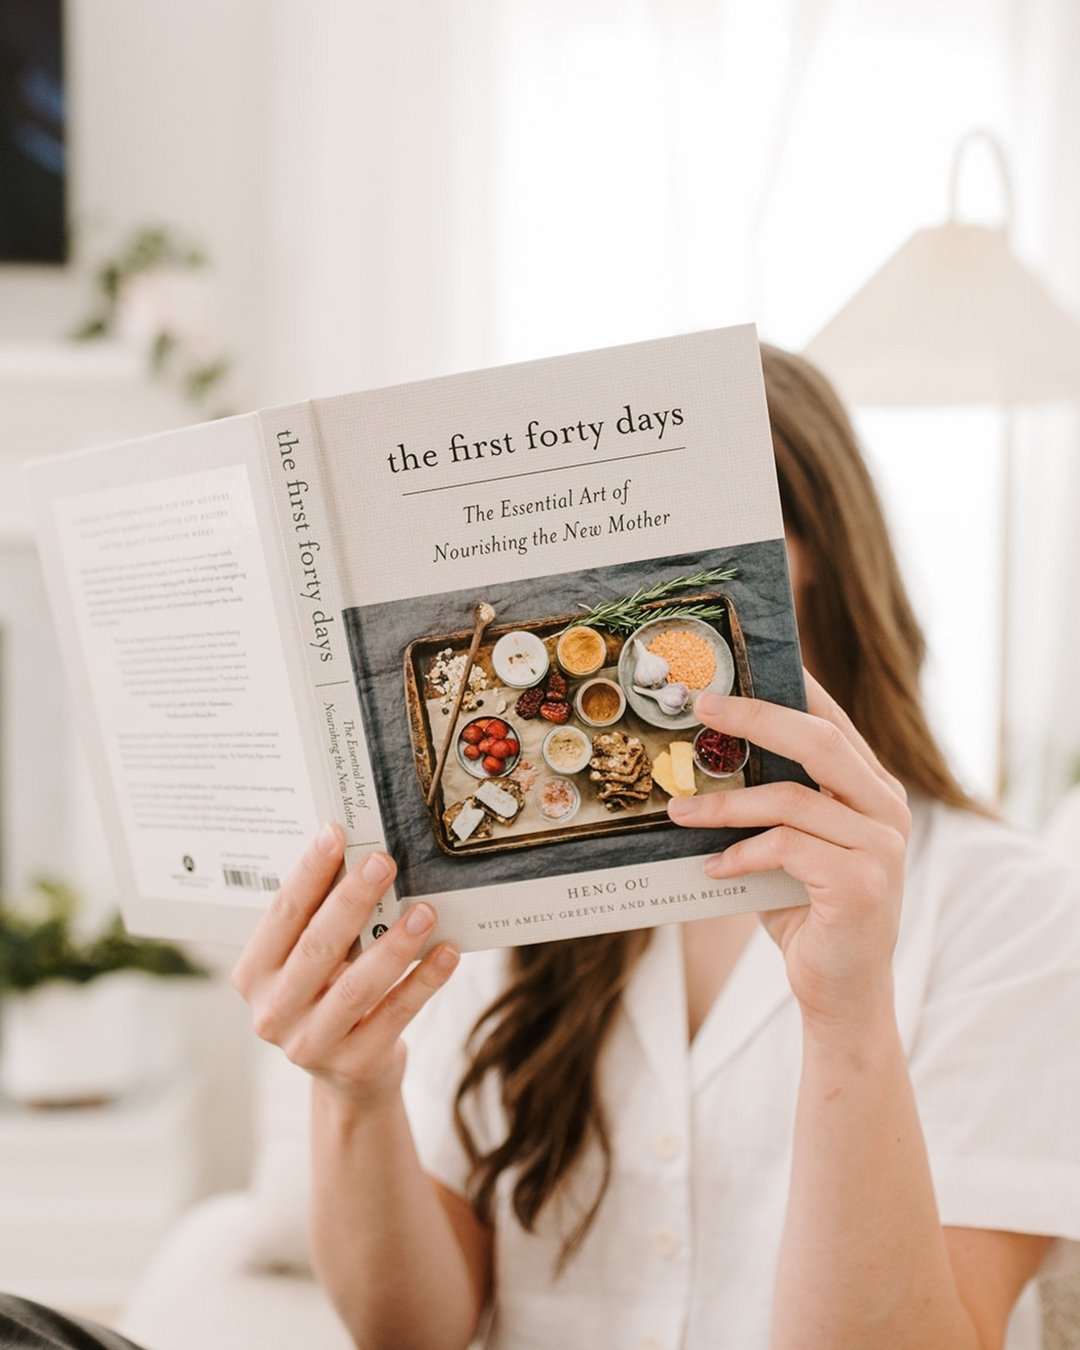 Where are all my book lovers at?! 😍📚⁣

⁣I love a good podcast or blog post as much as the next girl, but sometimes there's nothing like a good old-fashioned book. ⁣Here are my top 5 favorite books for doulas: 

⁣📗 The First Forty Days by Heng Ou -